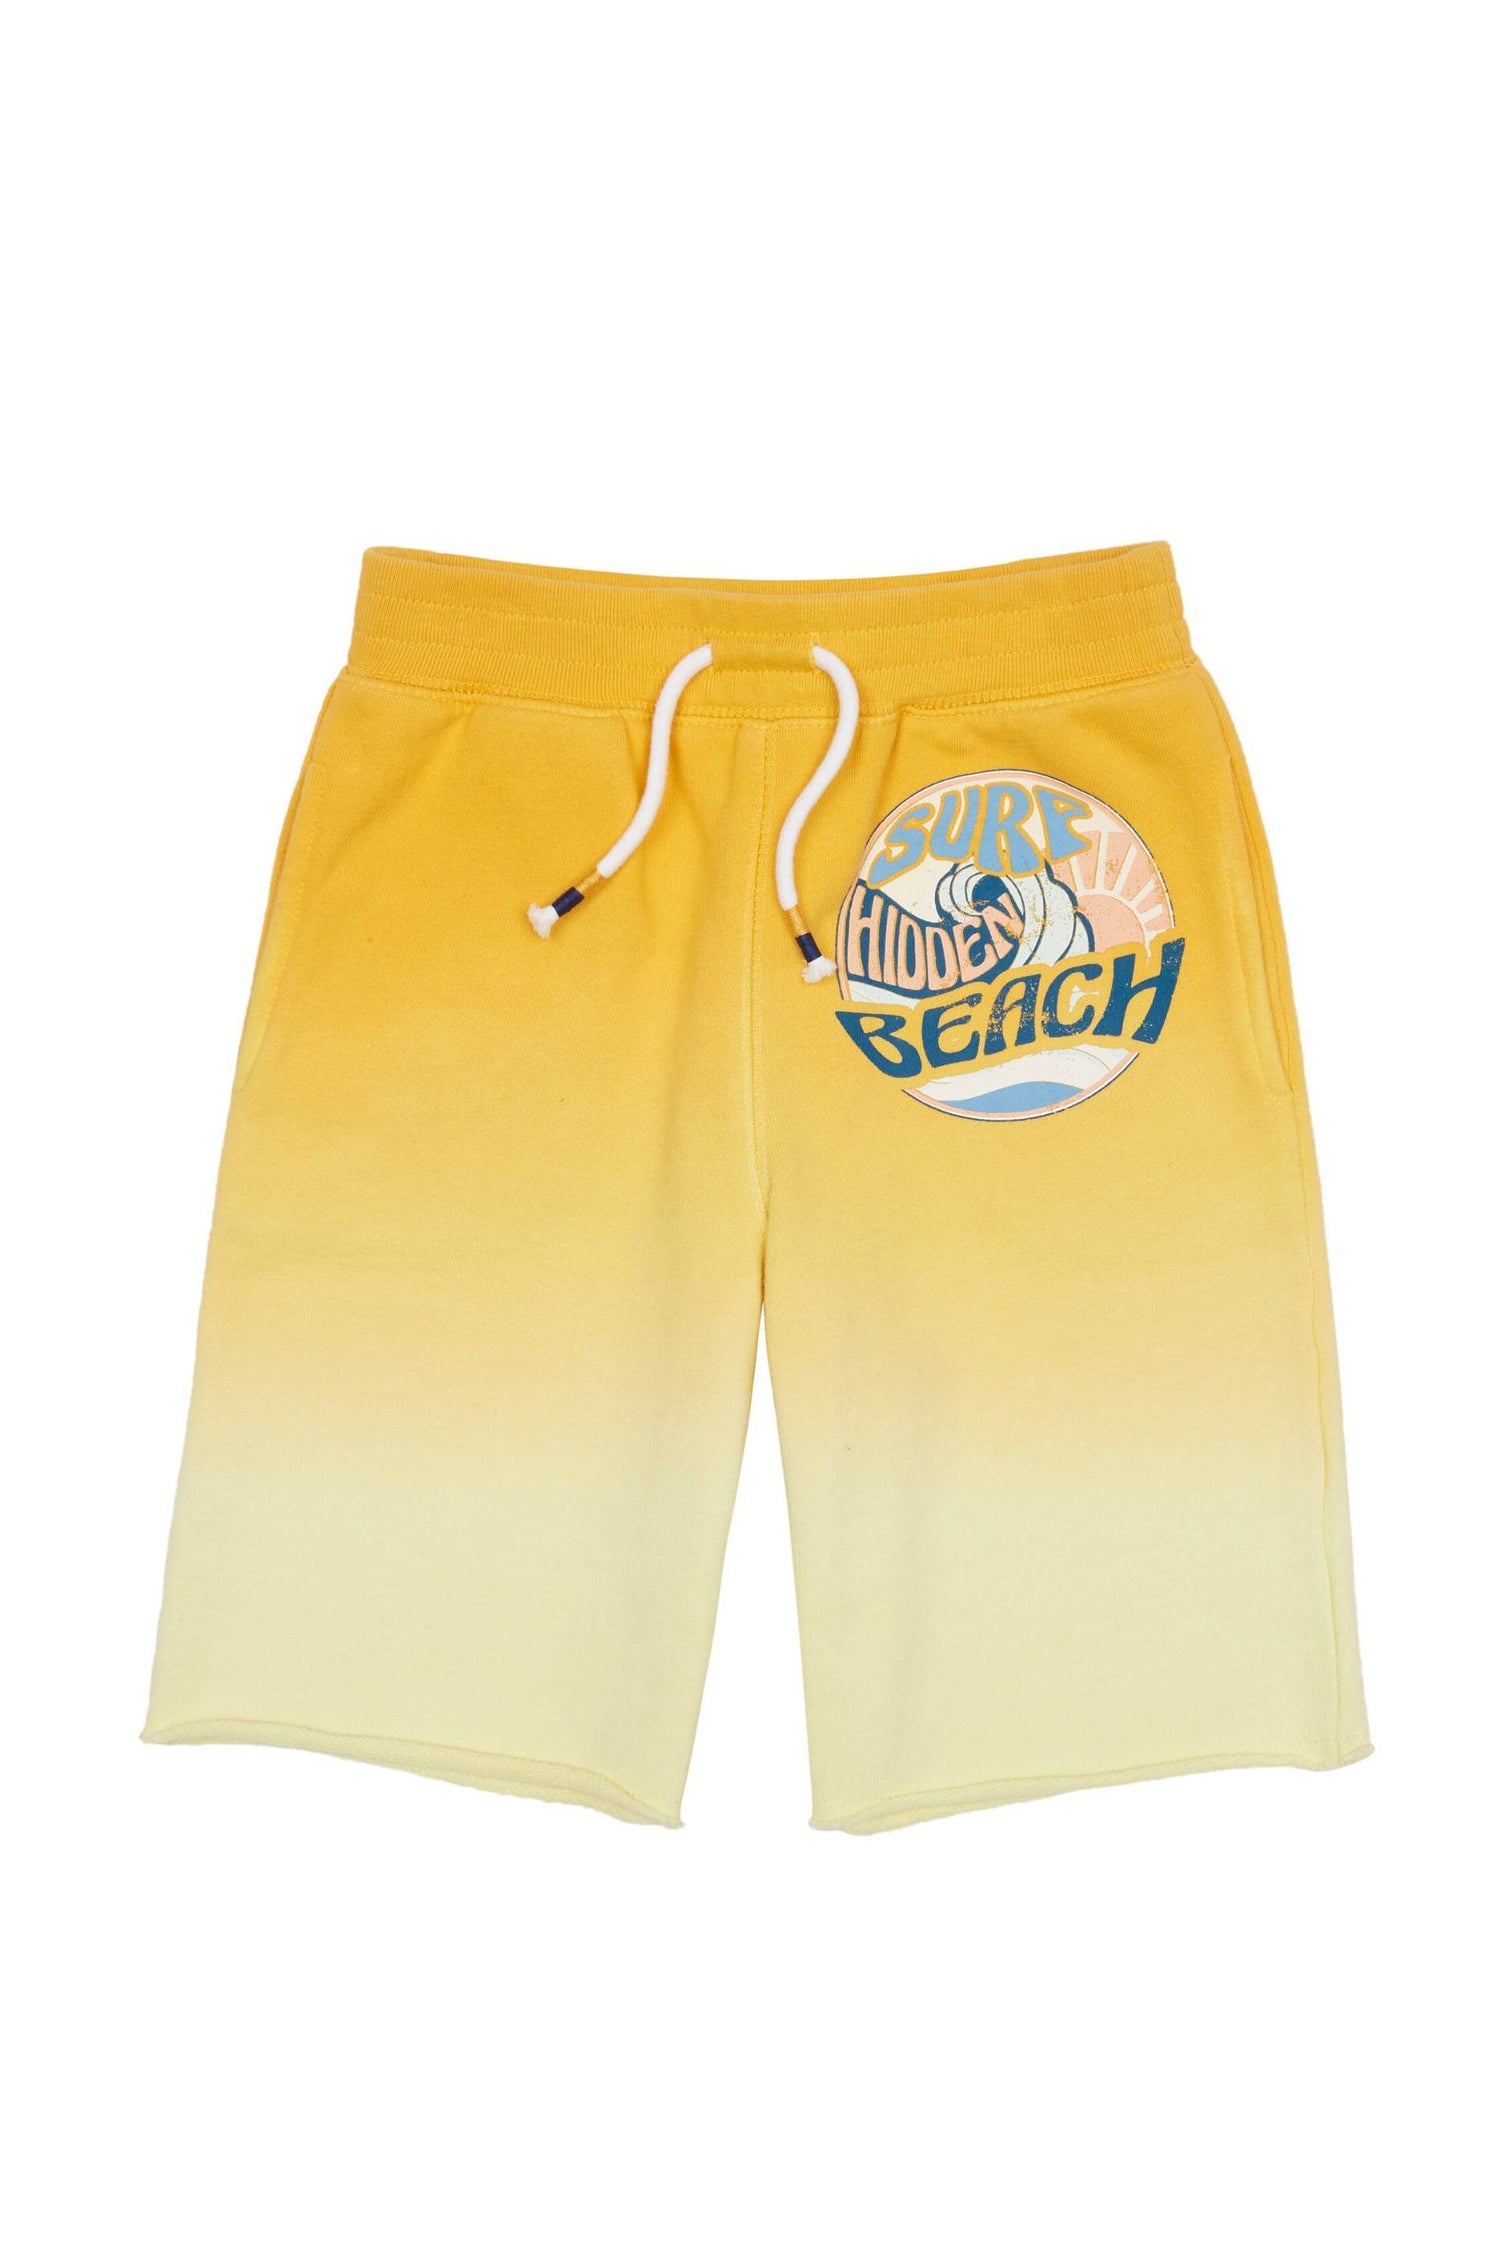 Ombre yellow knit shorts with faux drawstring at elastic waist and beach graphic with words Surf Hidden Beach.